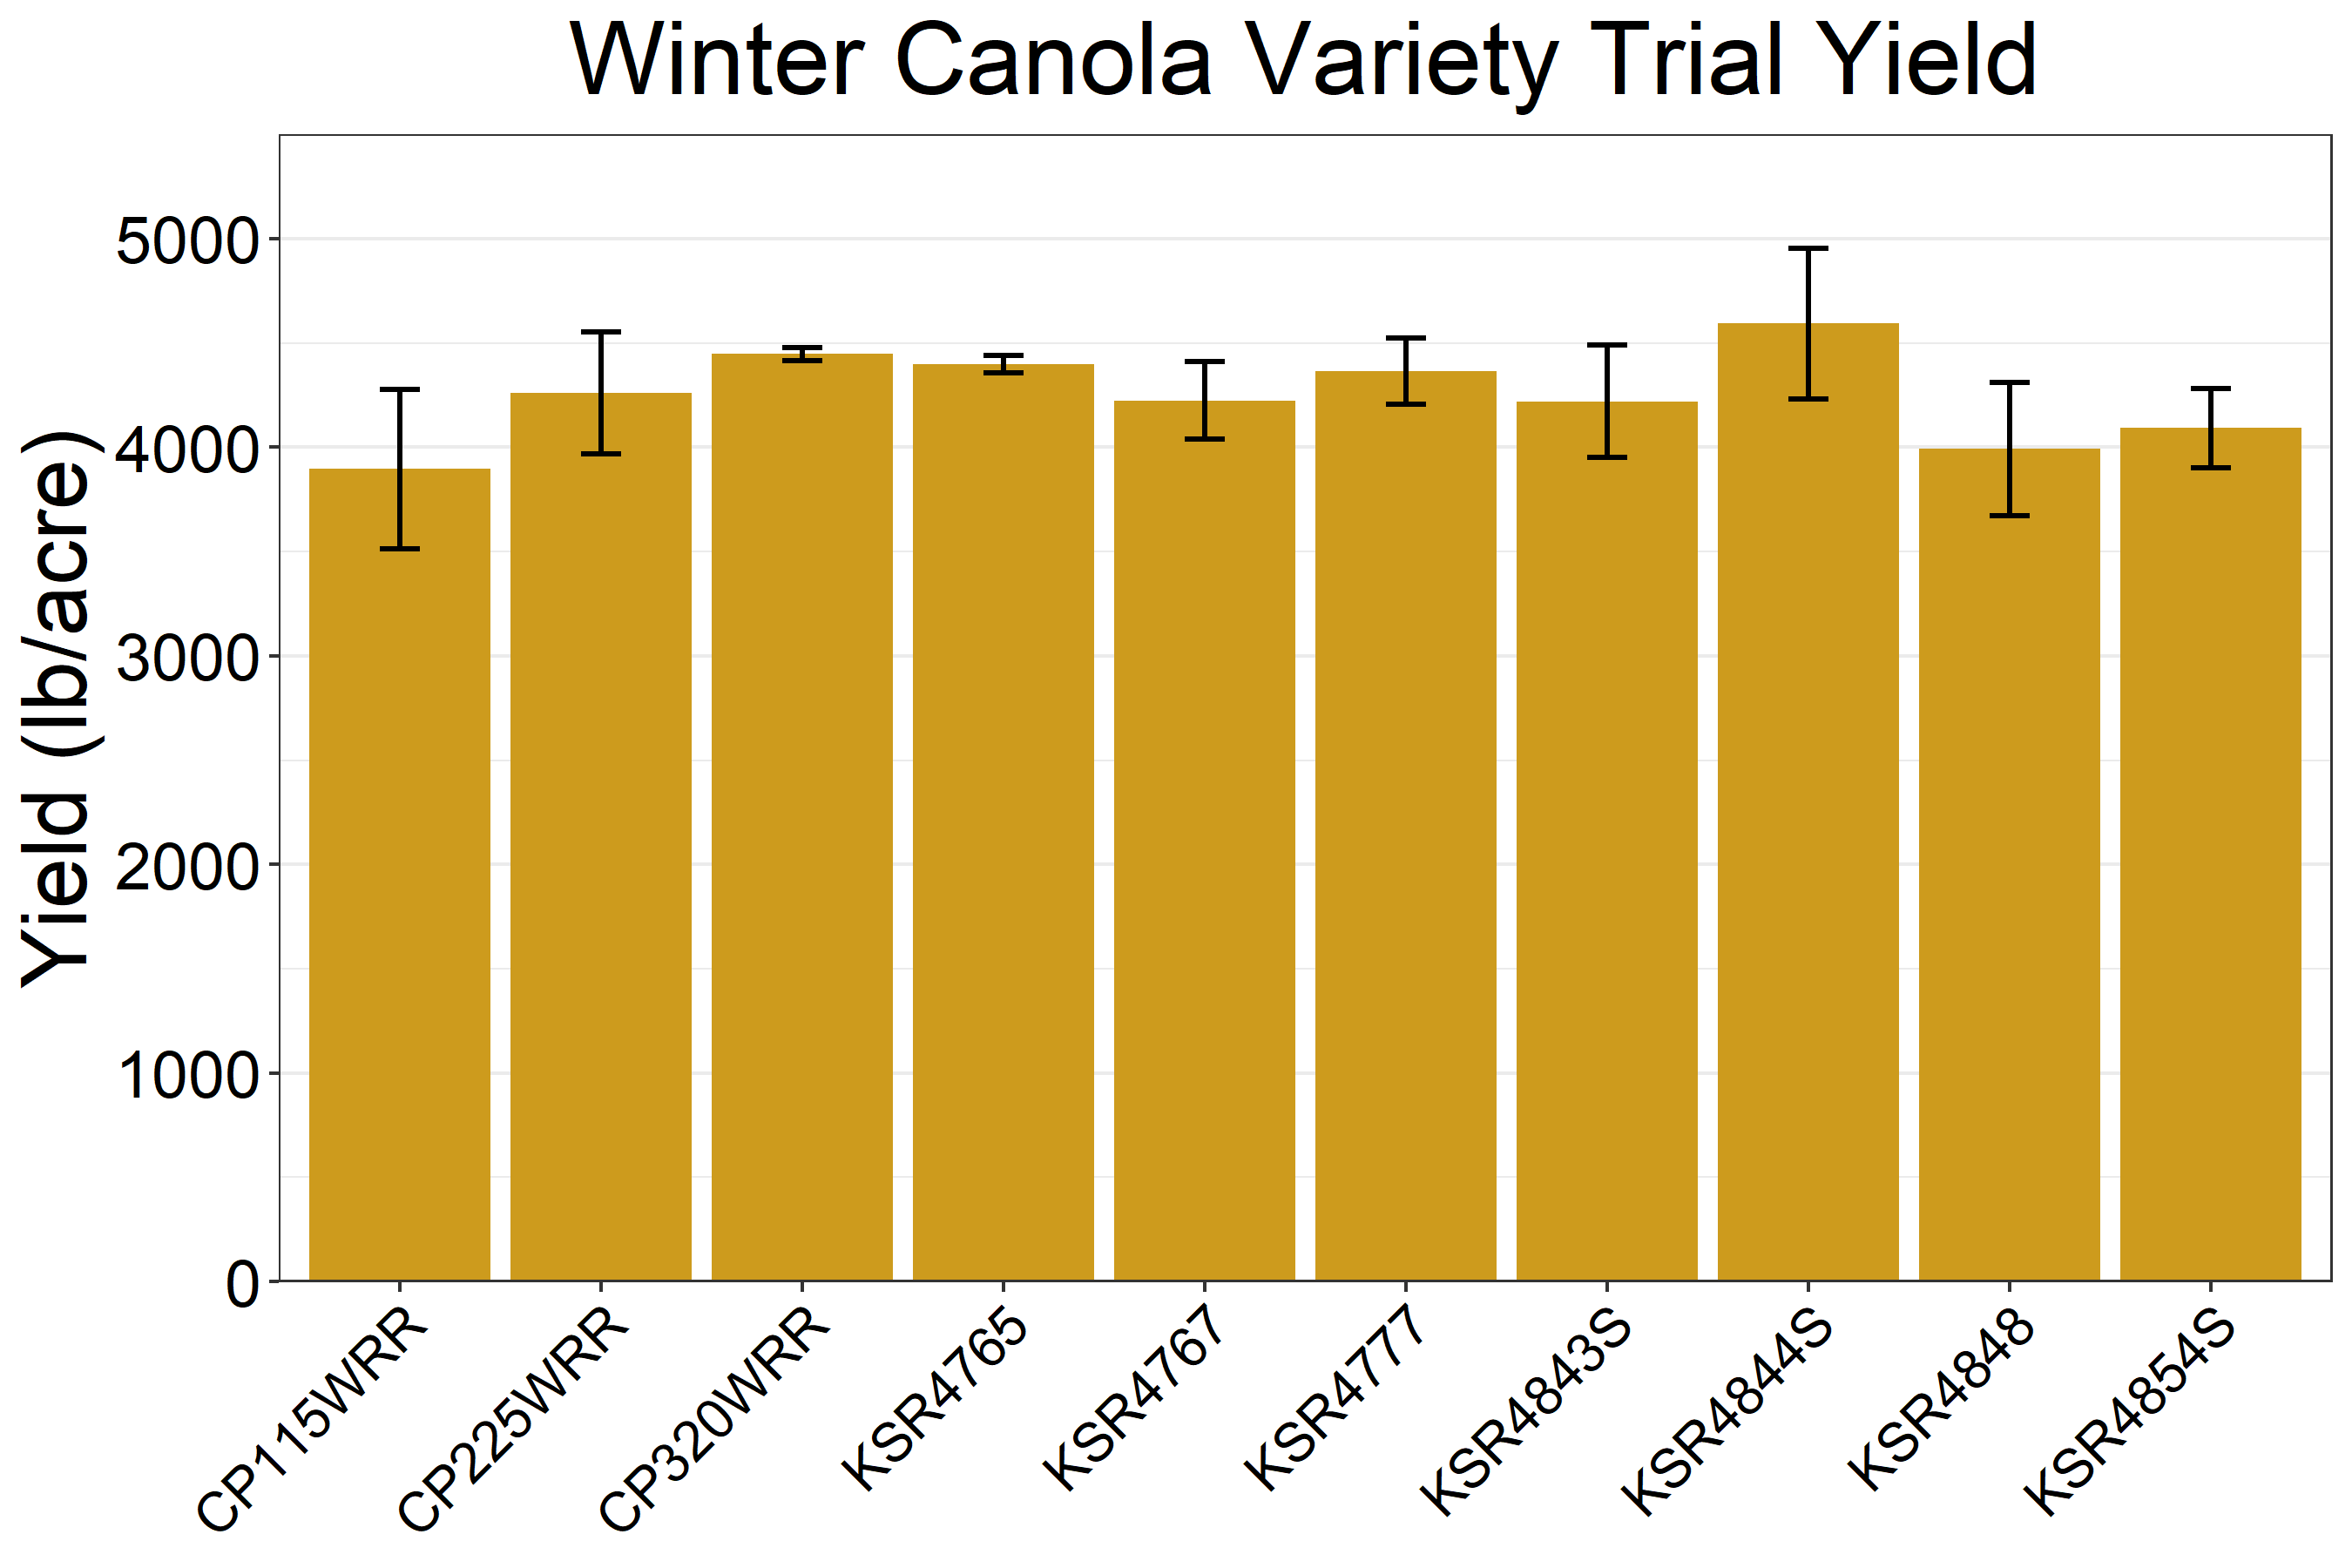 Bar chart displaying winter canola yield by variety